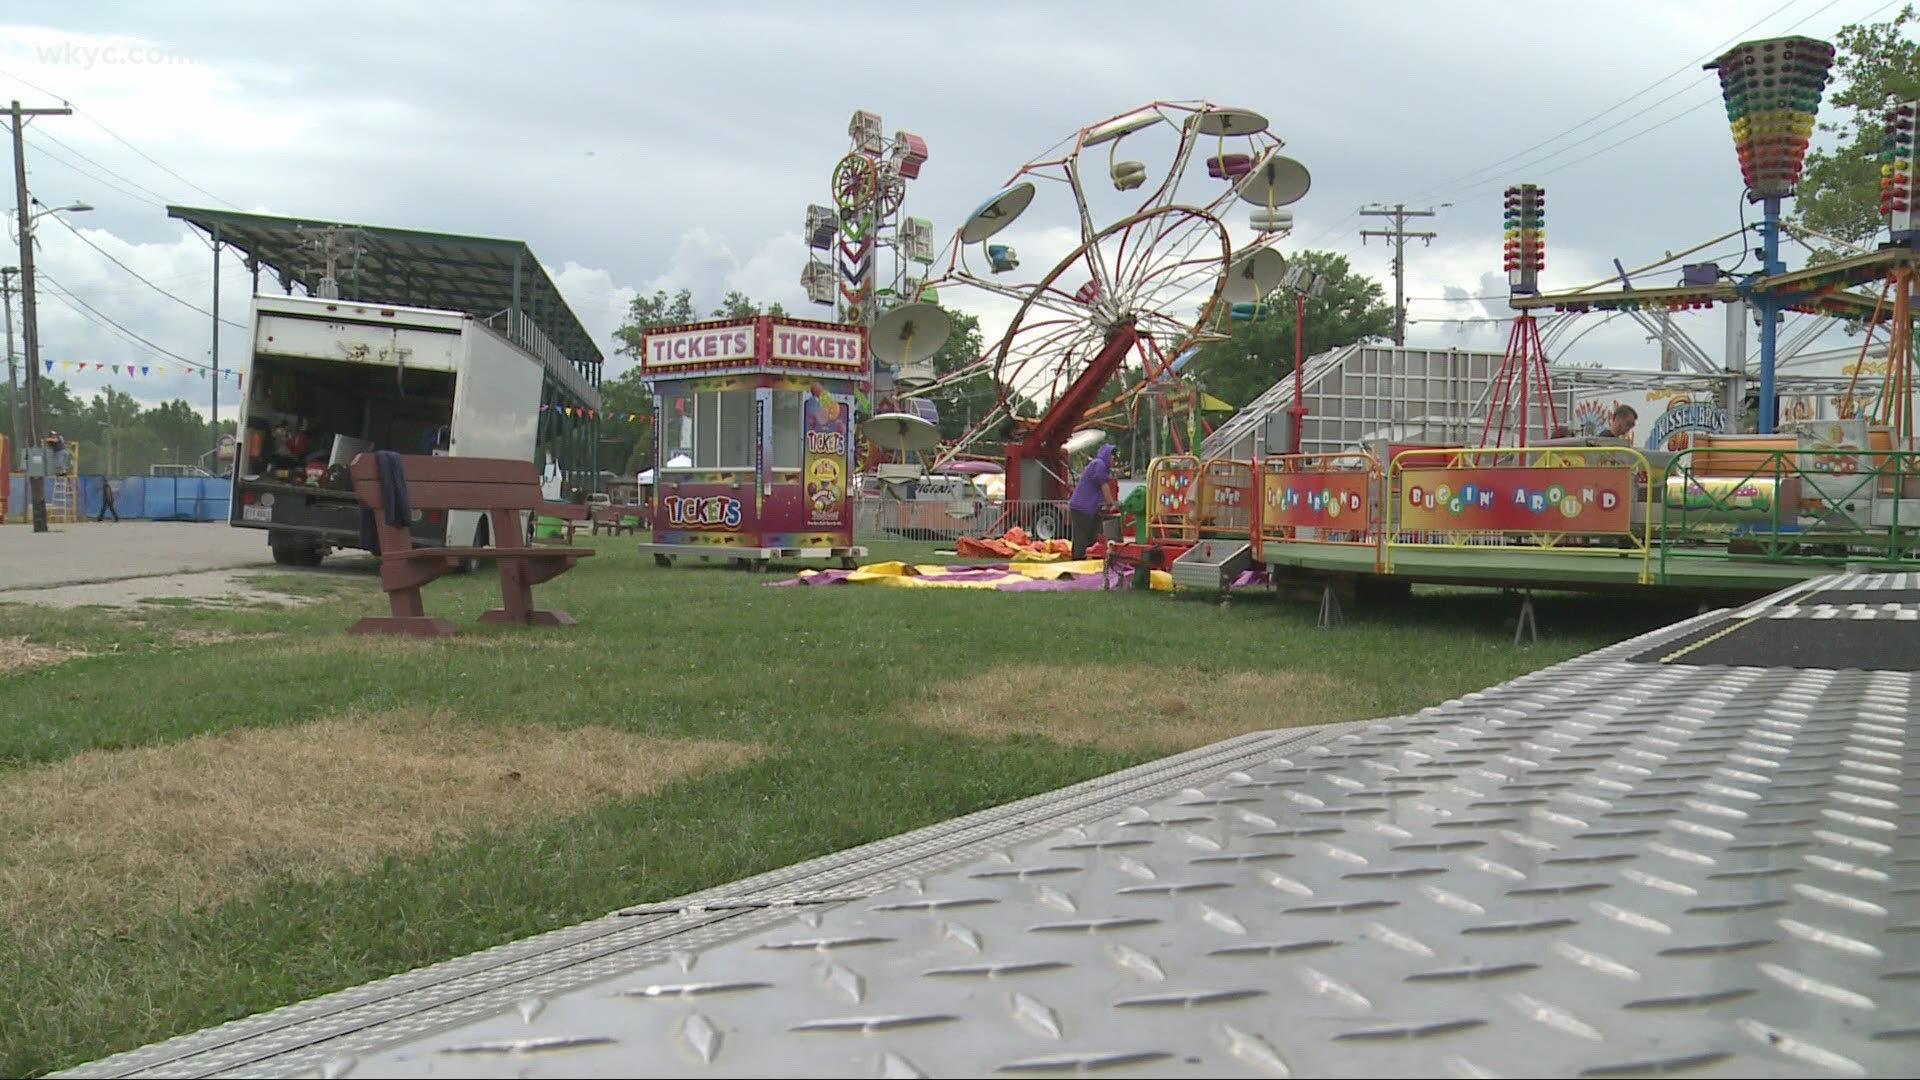 The fair will be held August 10-15. To get you in the mood, there will also be a 'Fair Food Drive Thru' on May 1-2.